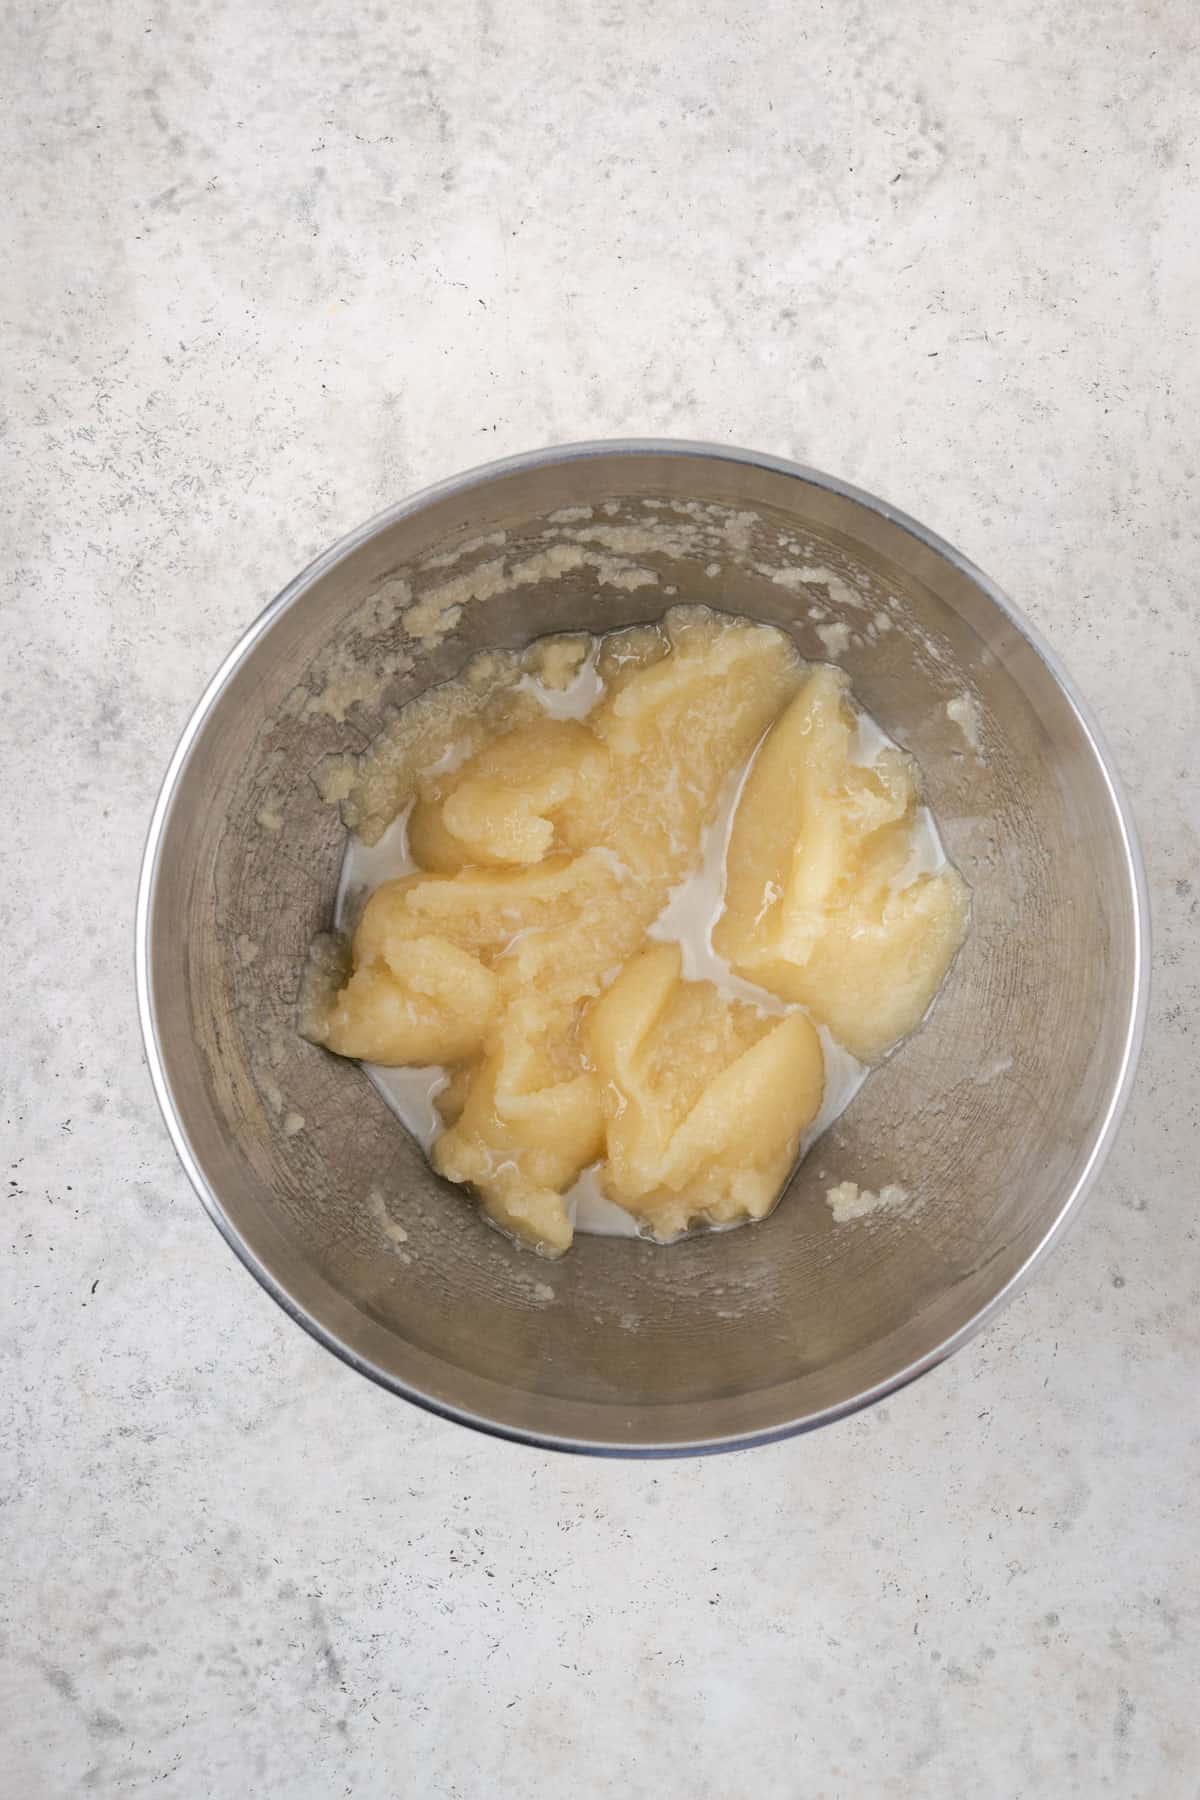 Oil and sugar beaten together in a large metal mixing bowl.